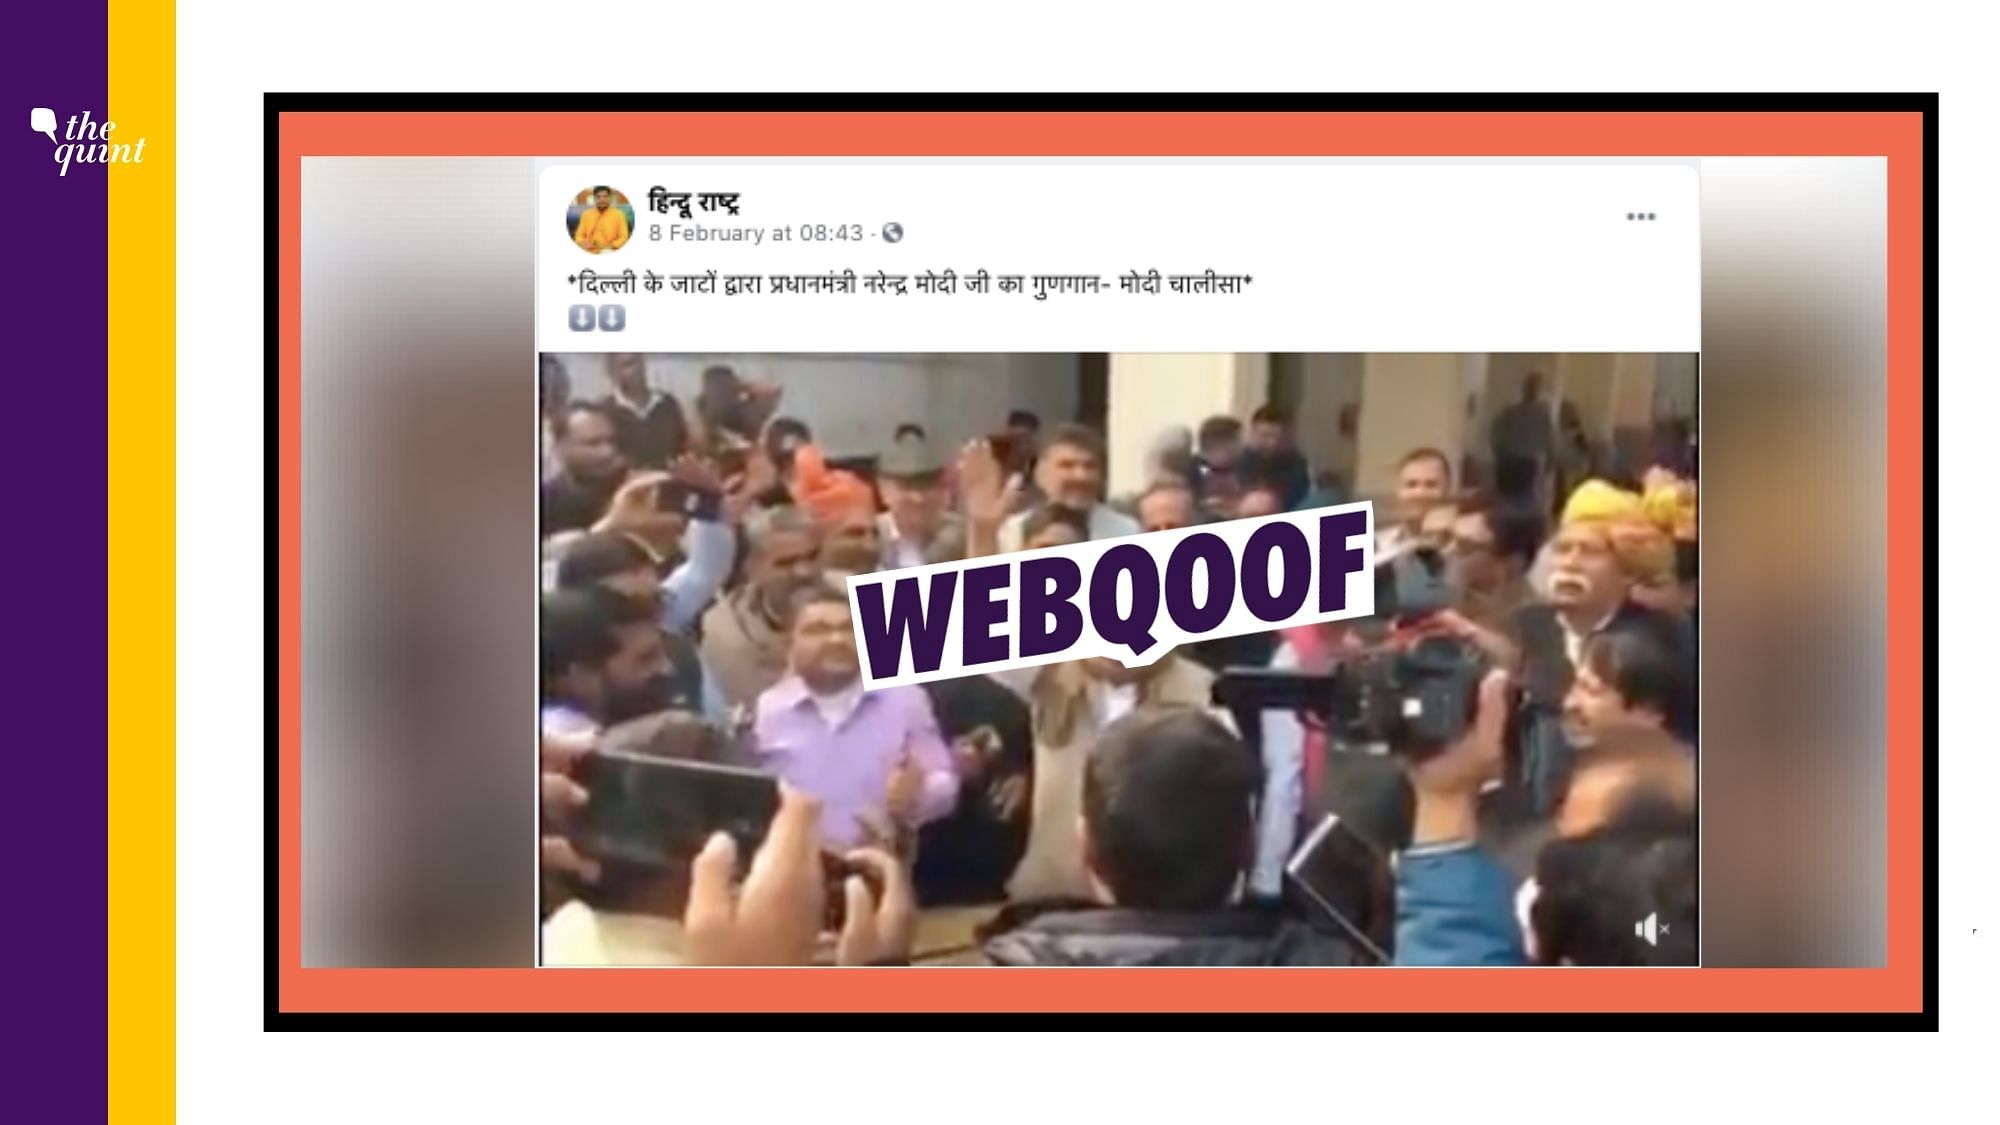 An old clip which at least dates back to January 2020 is being shared with a claim that it shows the Jat community singing praising for Prime Minister Narendra Modi.